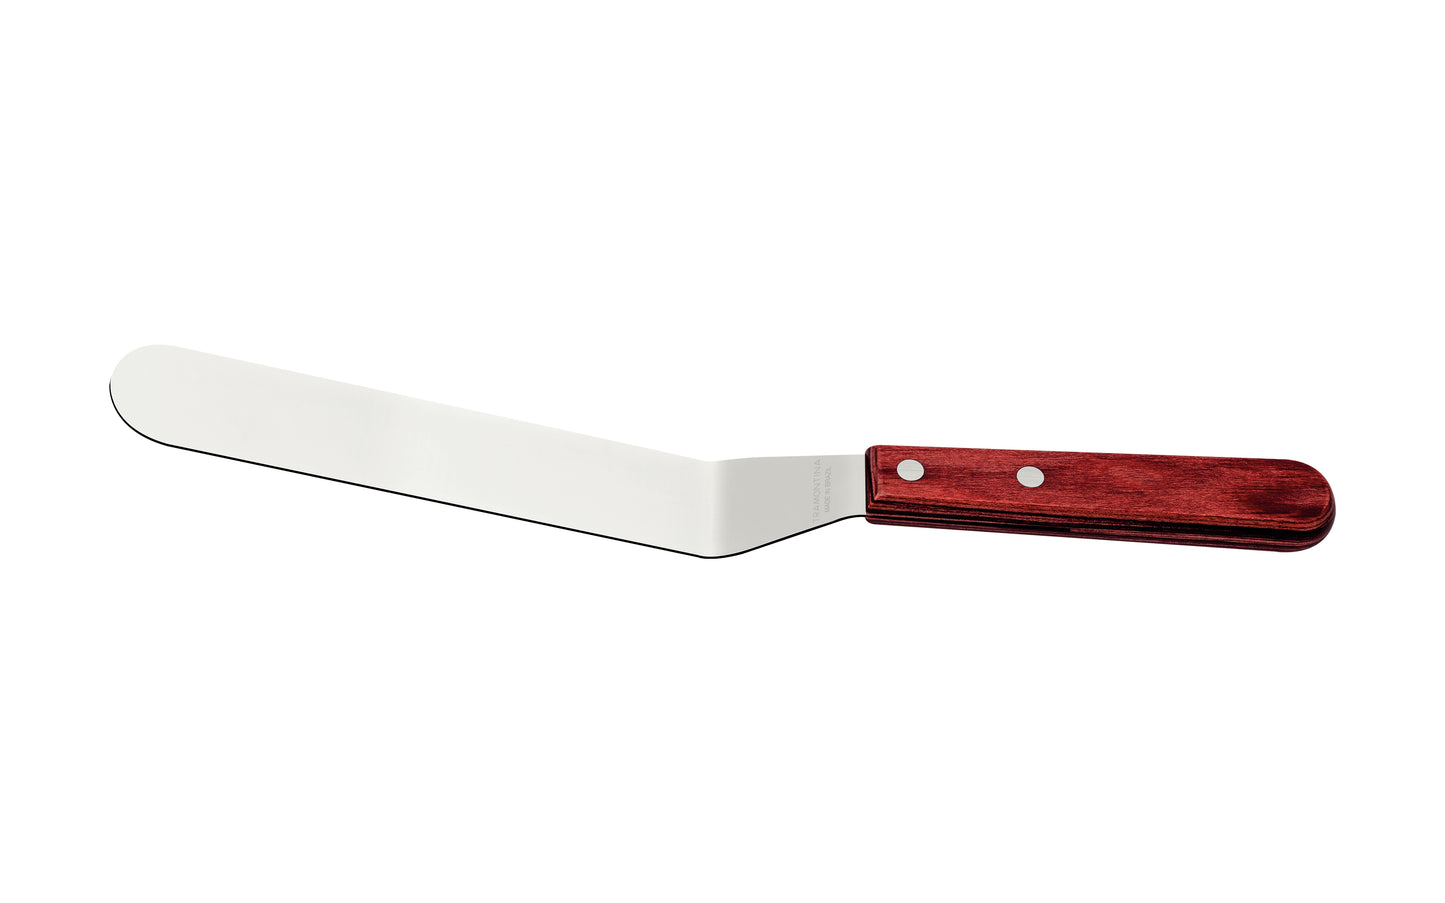 Tramontina Offset Spatula Stainless-Steel Blade 7" Treated Red Polywood Handle - 21162/177